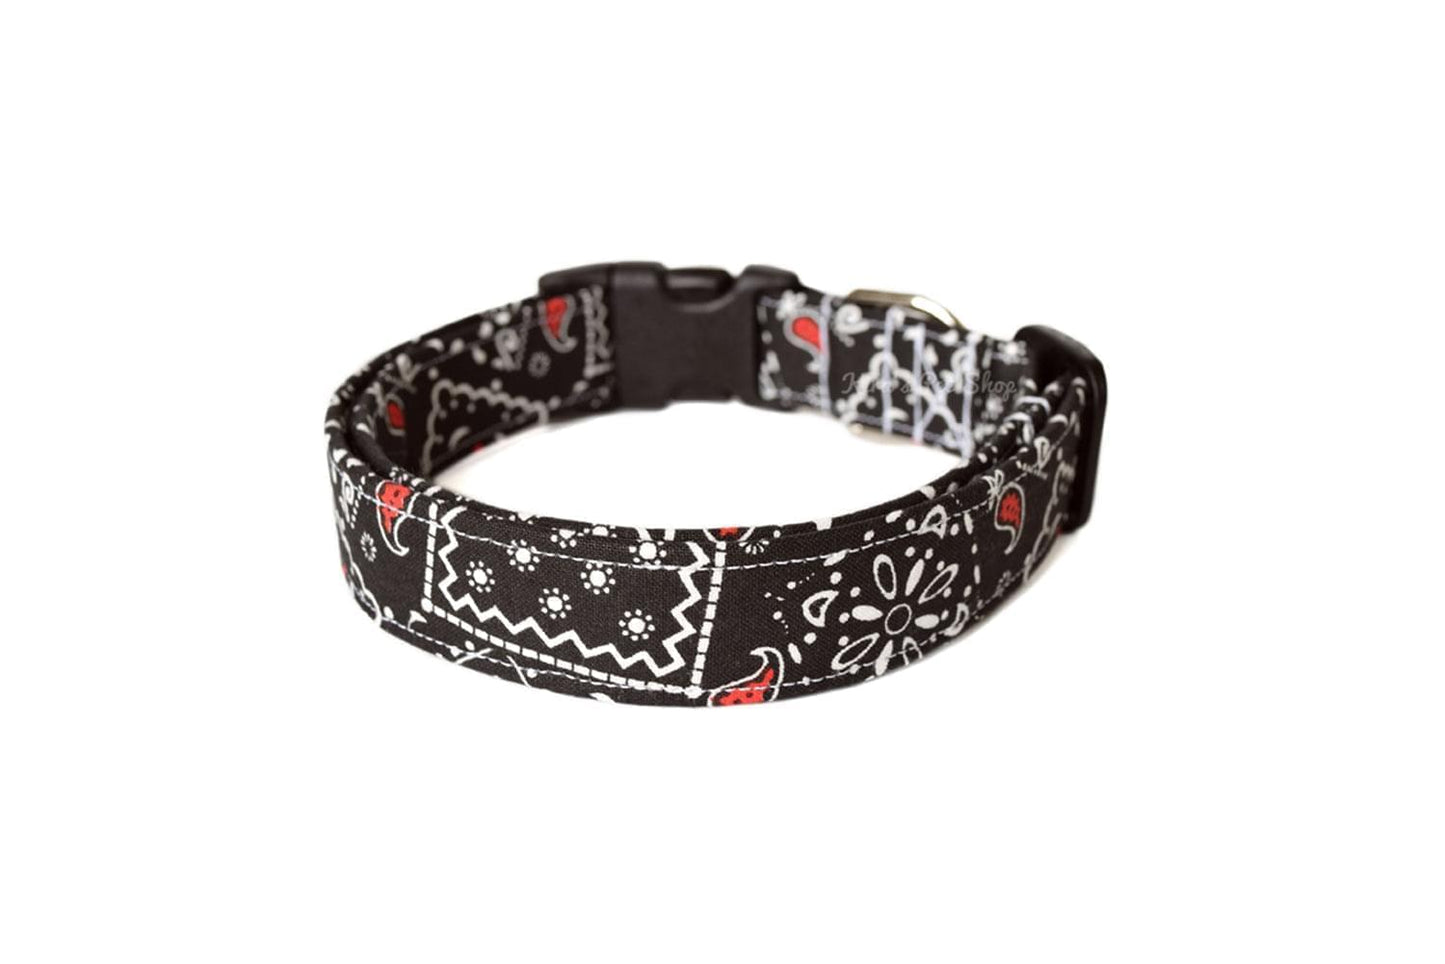 Black & White Paisley with Red Accents Bandana Print Dog Collar